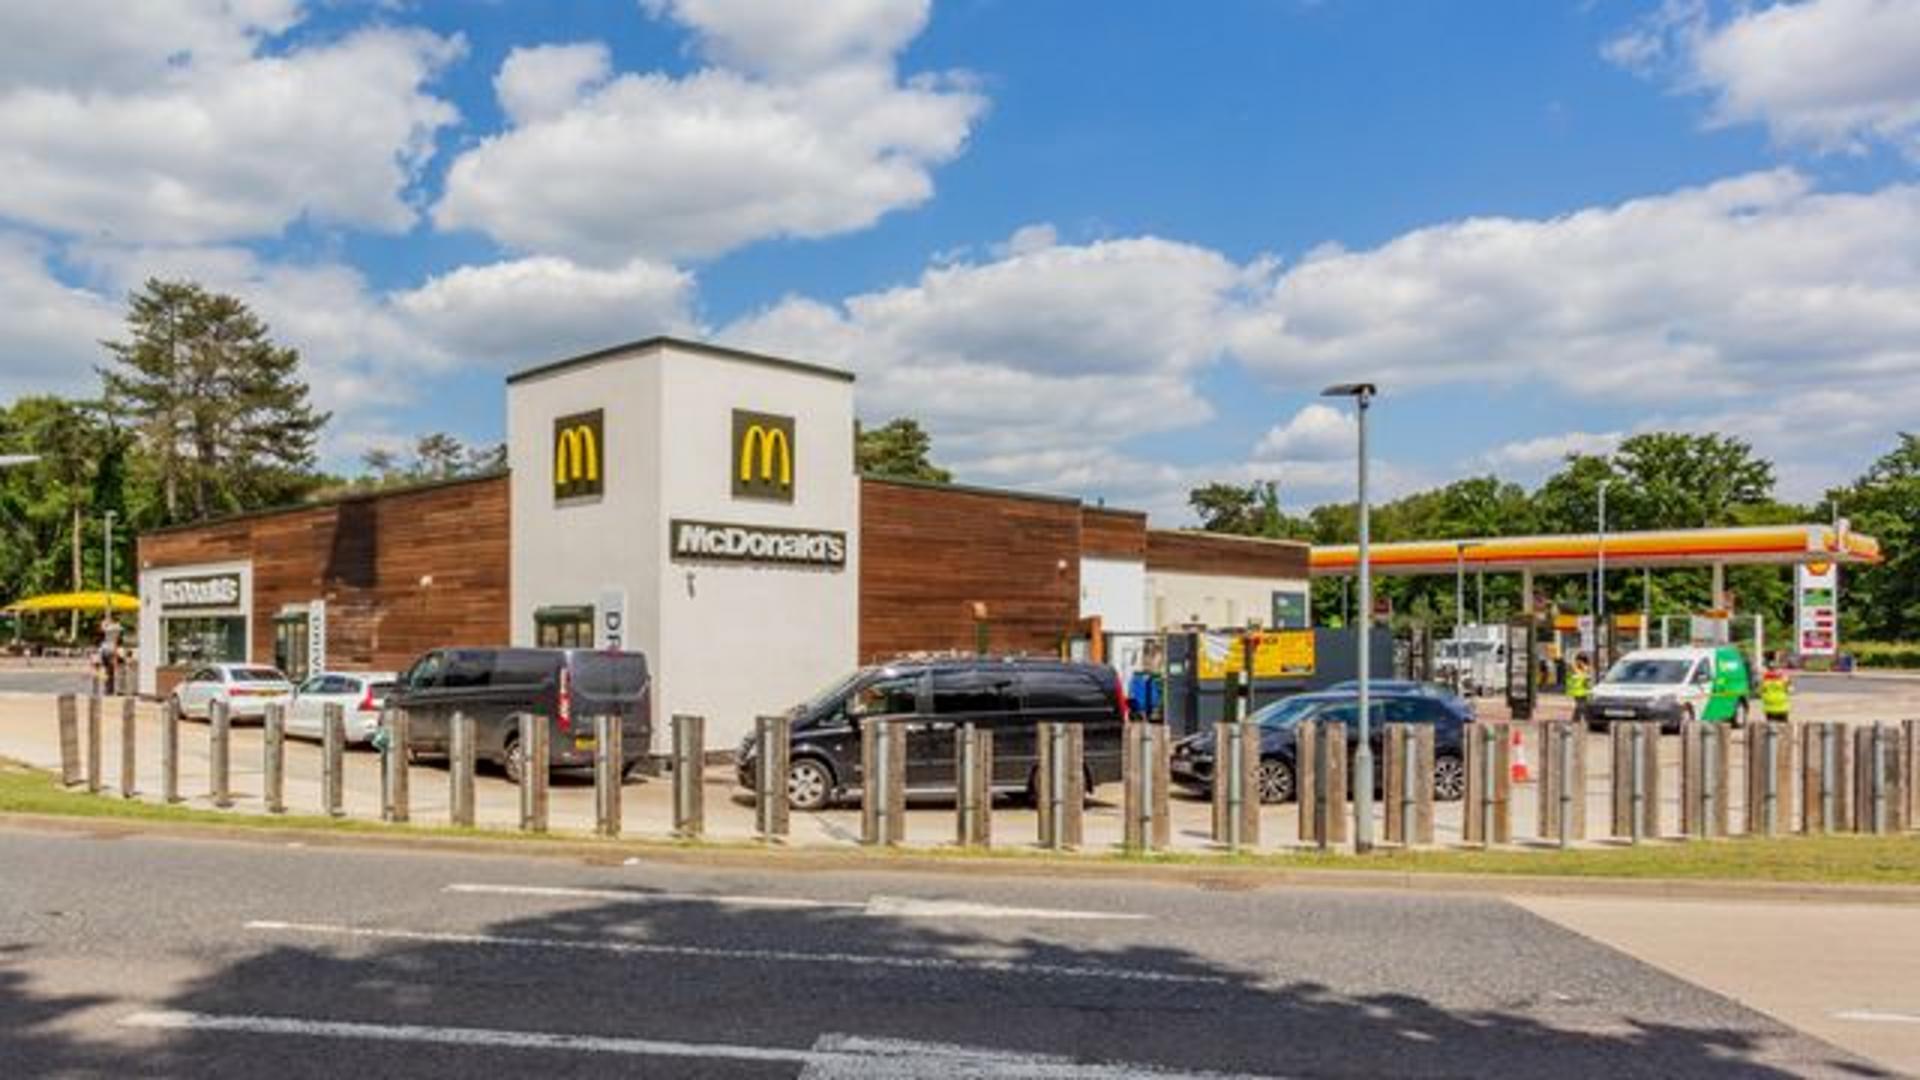 Key A11 service station up for sale for £8m 